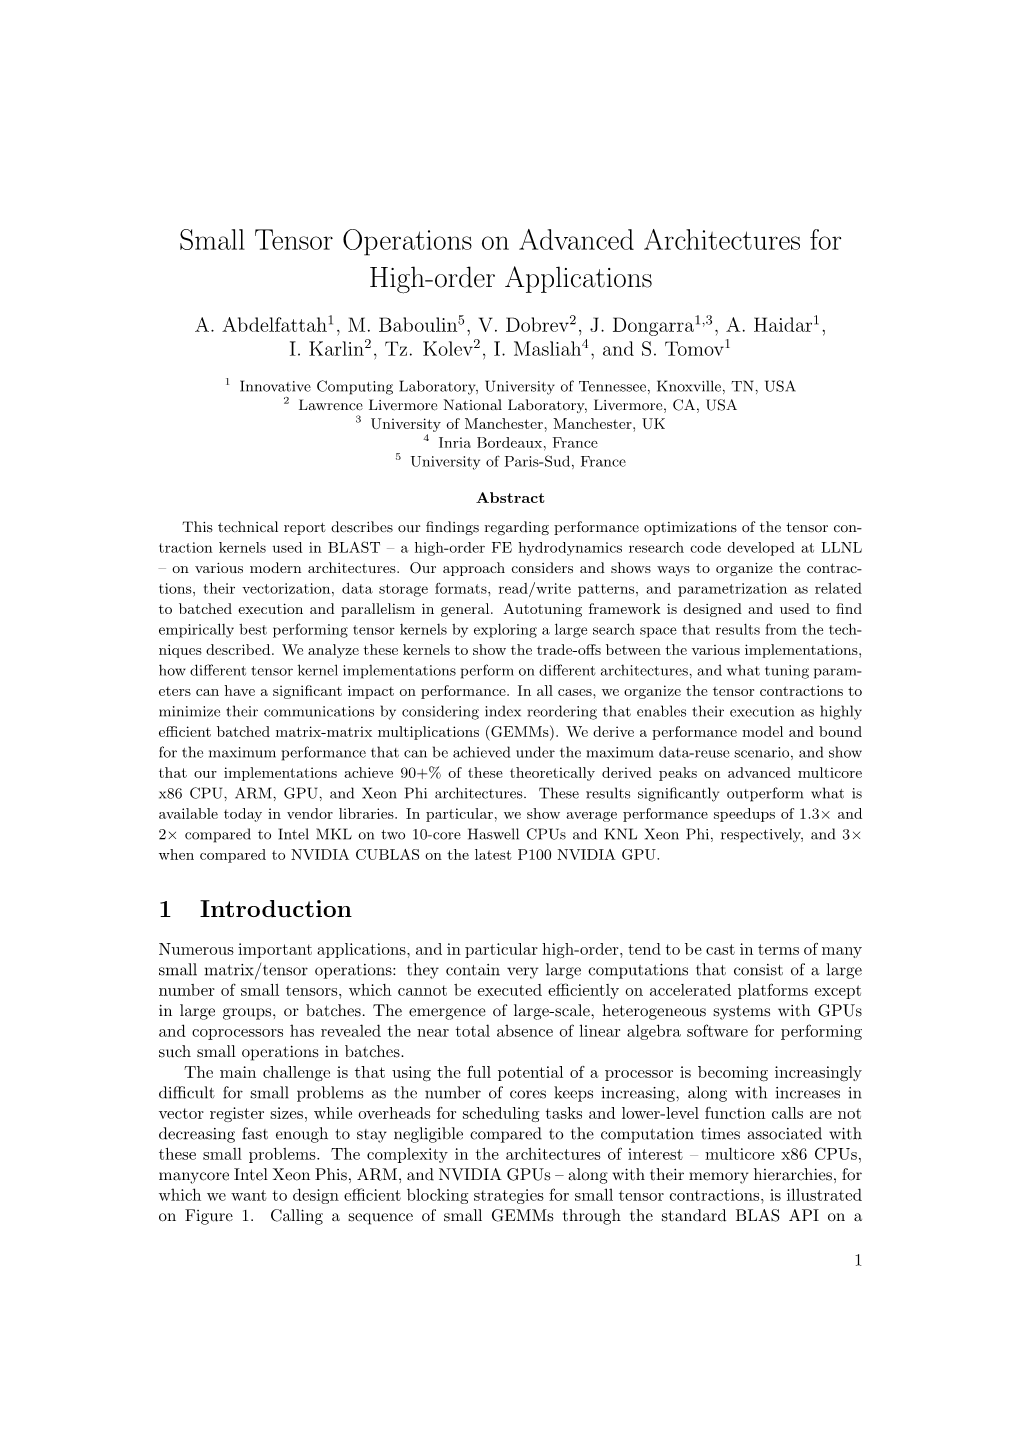 Small Tensor Operations on Advanced Architectures for High-Order Applications